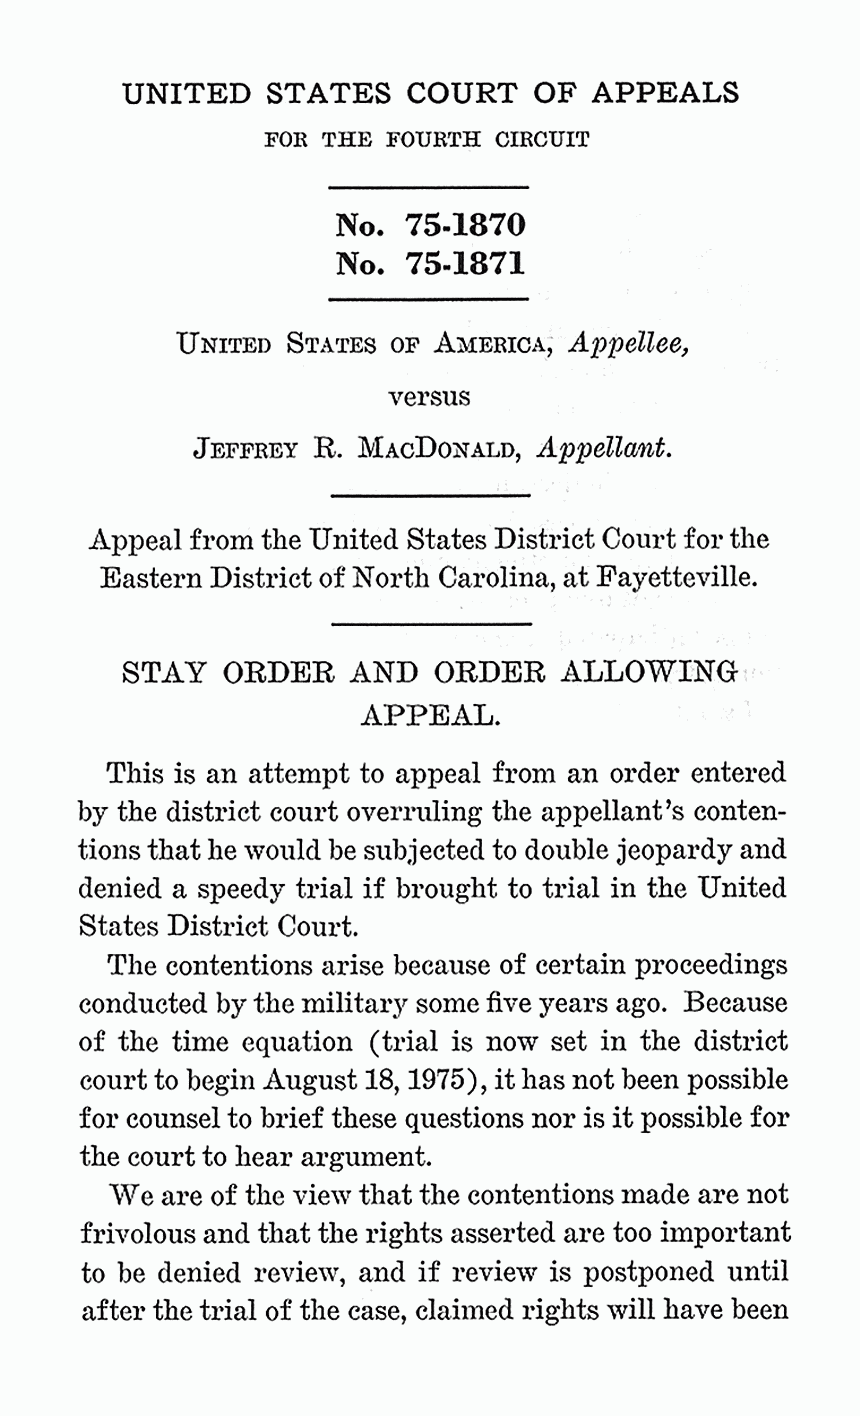 August 15, 1975: U. S. Court of Appeals for the Fourth Circuit; Stay Order and Order Allowing Appeal re: Double Jeopardy and Speedy Trial, p. 1 of 2